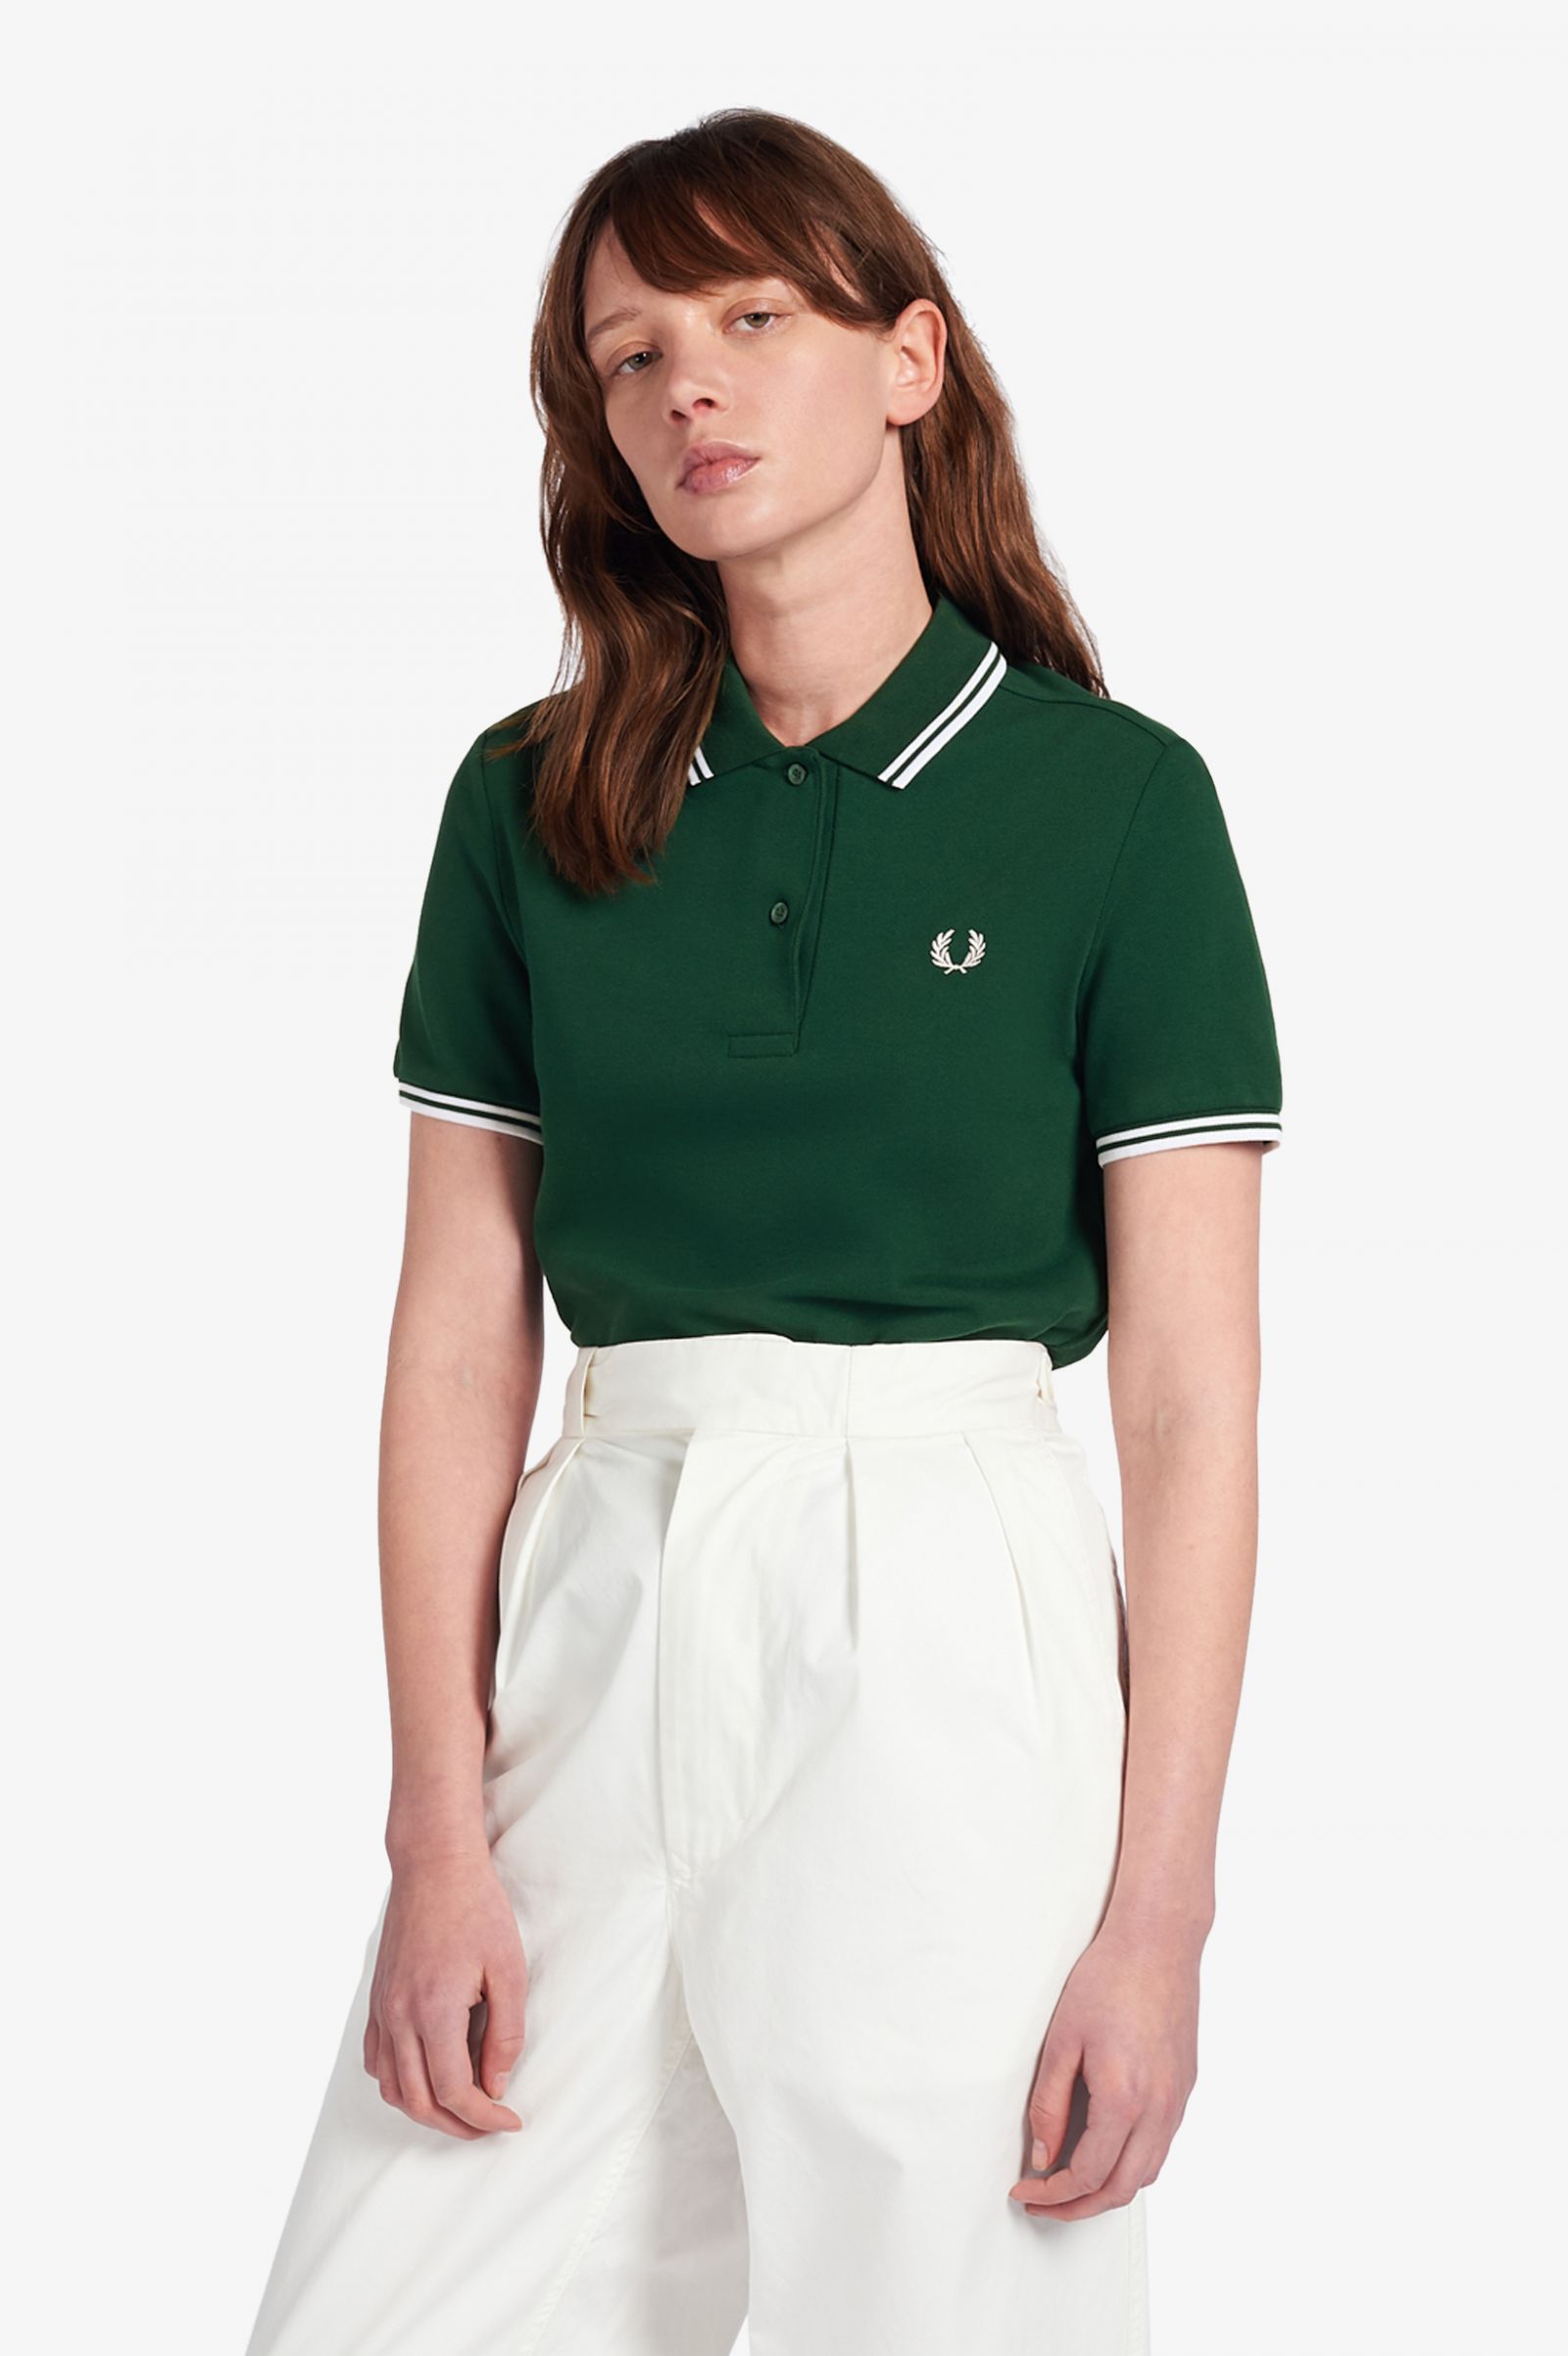 G3600 Ivy White White The Fred Perry Shirt Womens Short 